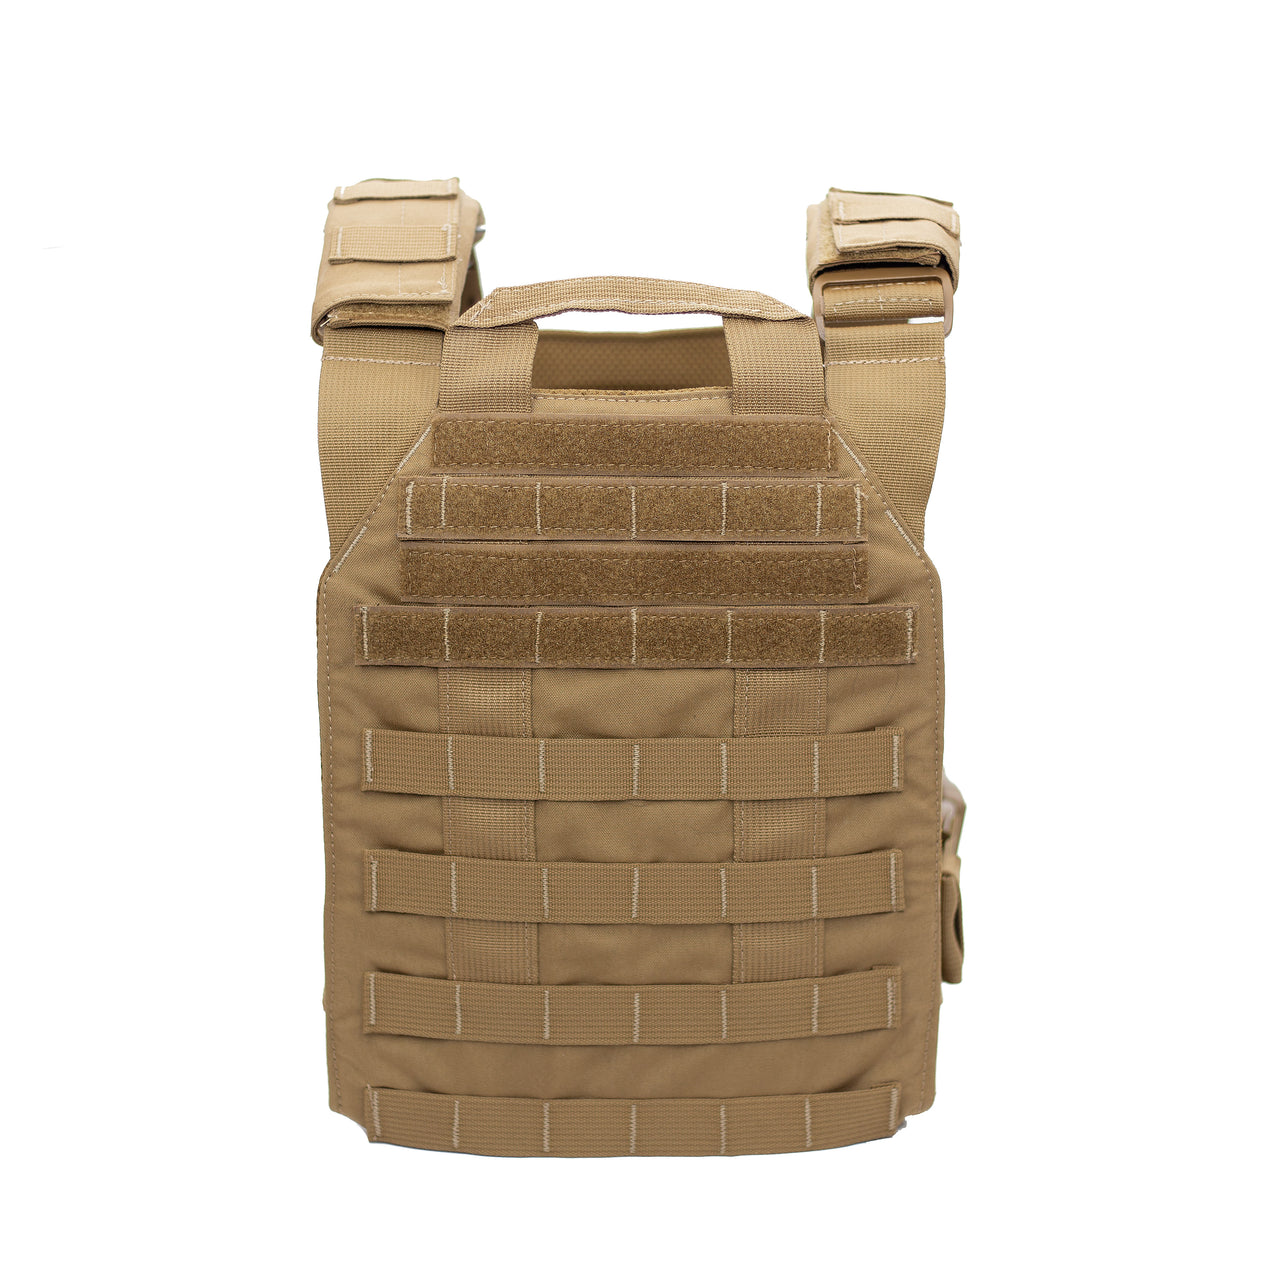 A Predator Armor Minuteman Plate Carrier on a white background.